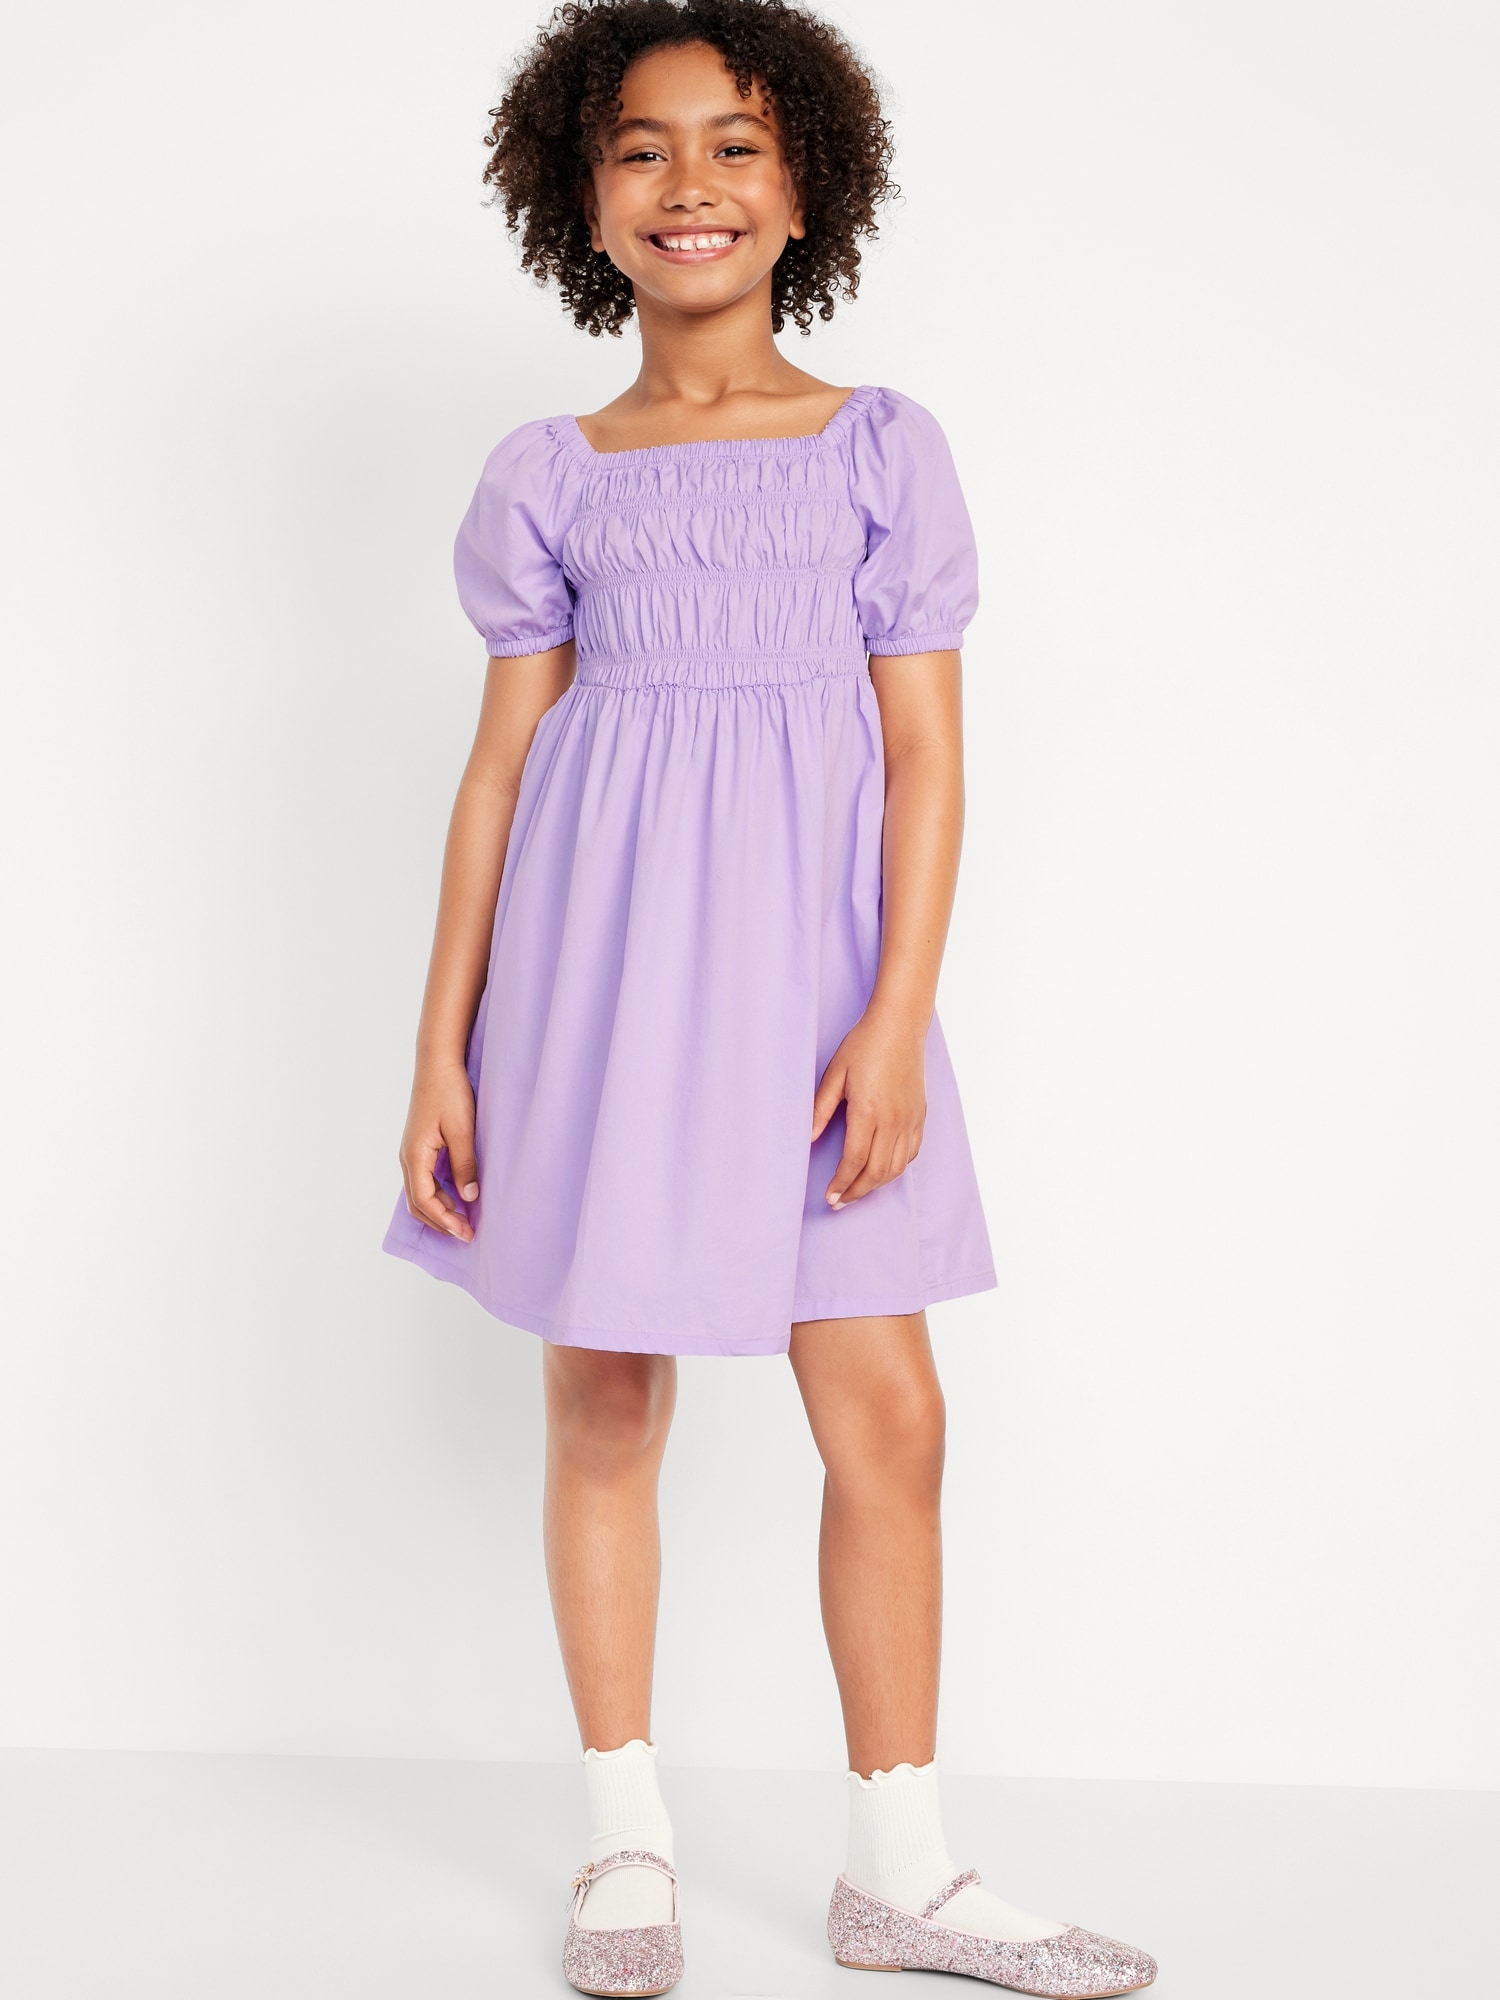 Printed Puff-Sleeve Smocked Dress for Girls